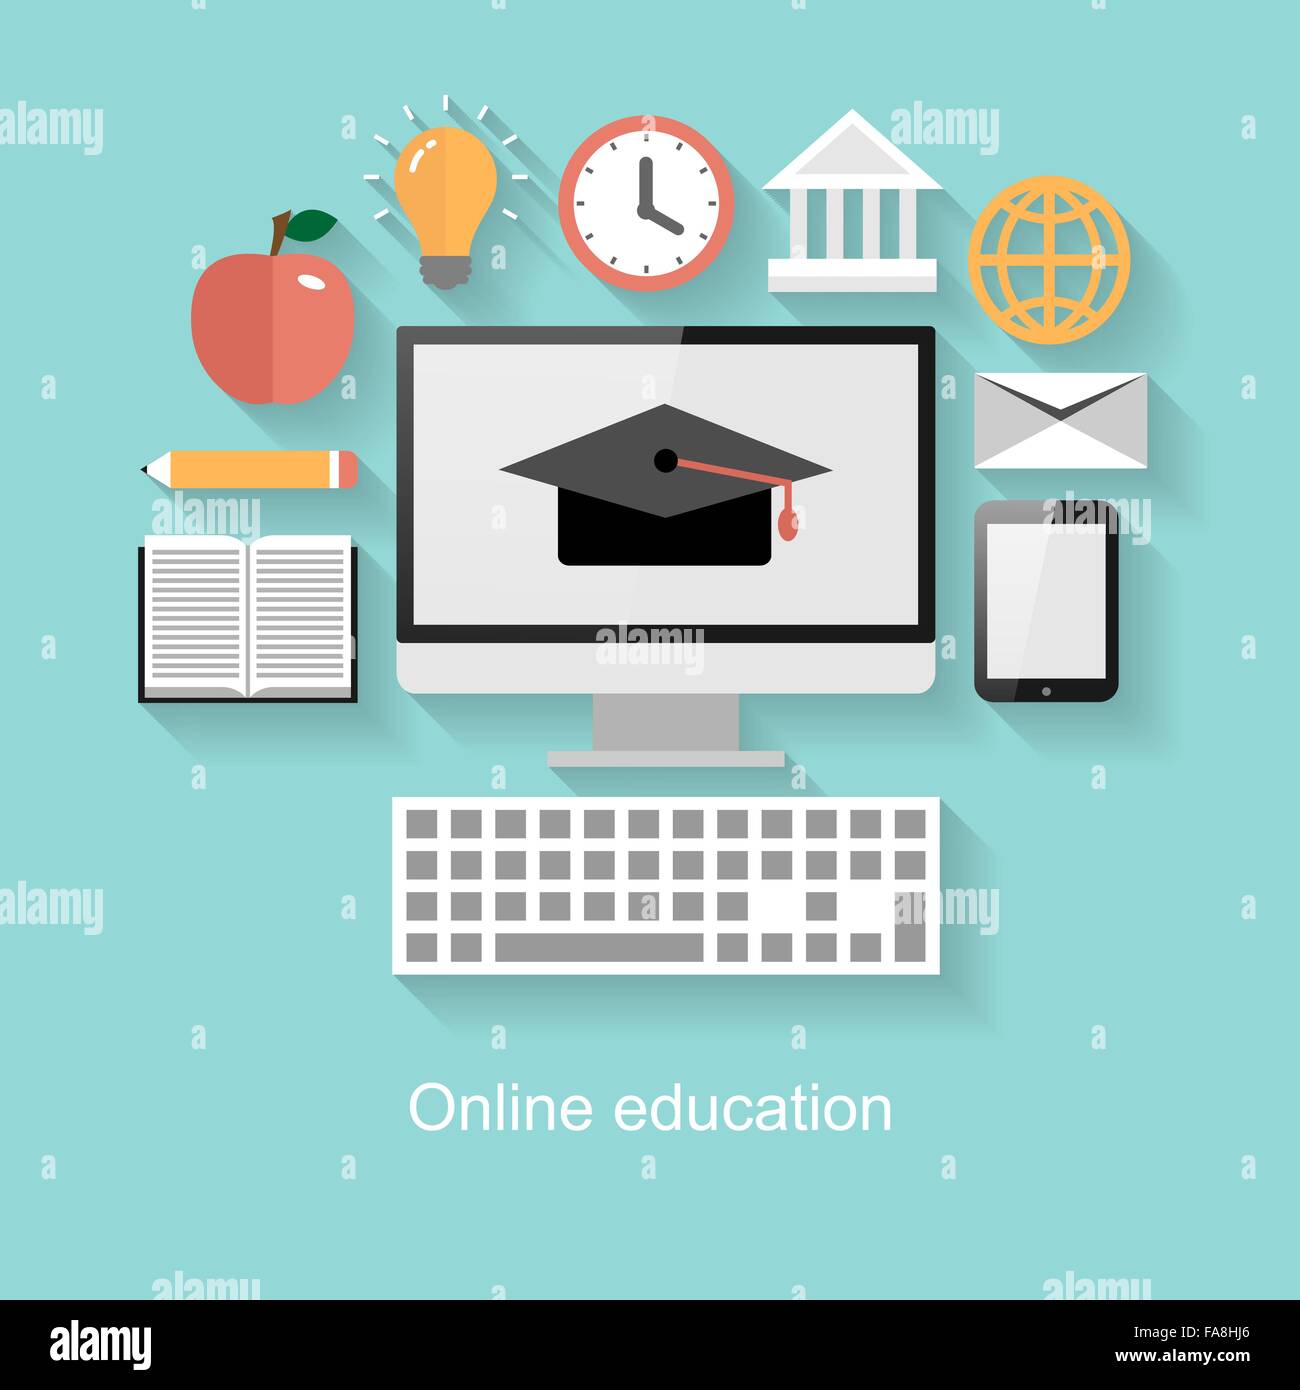 Online education concept, flat design with long shadow on turquoise background Stock Vector